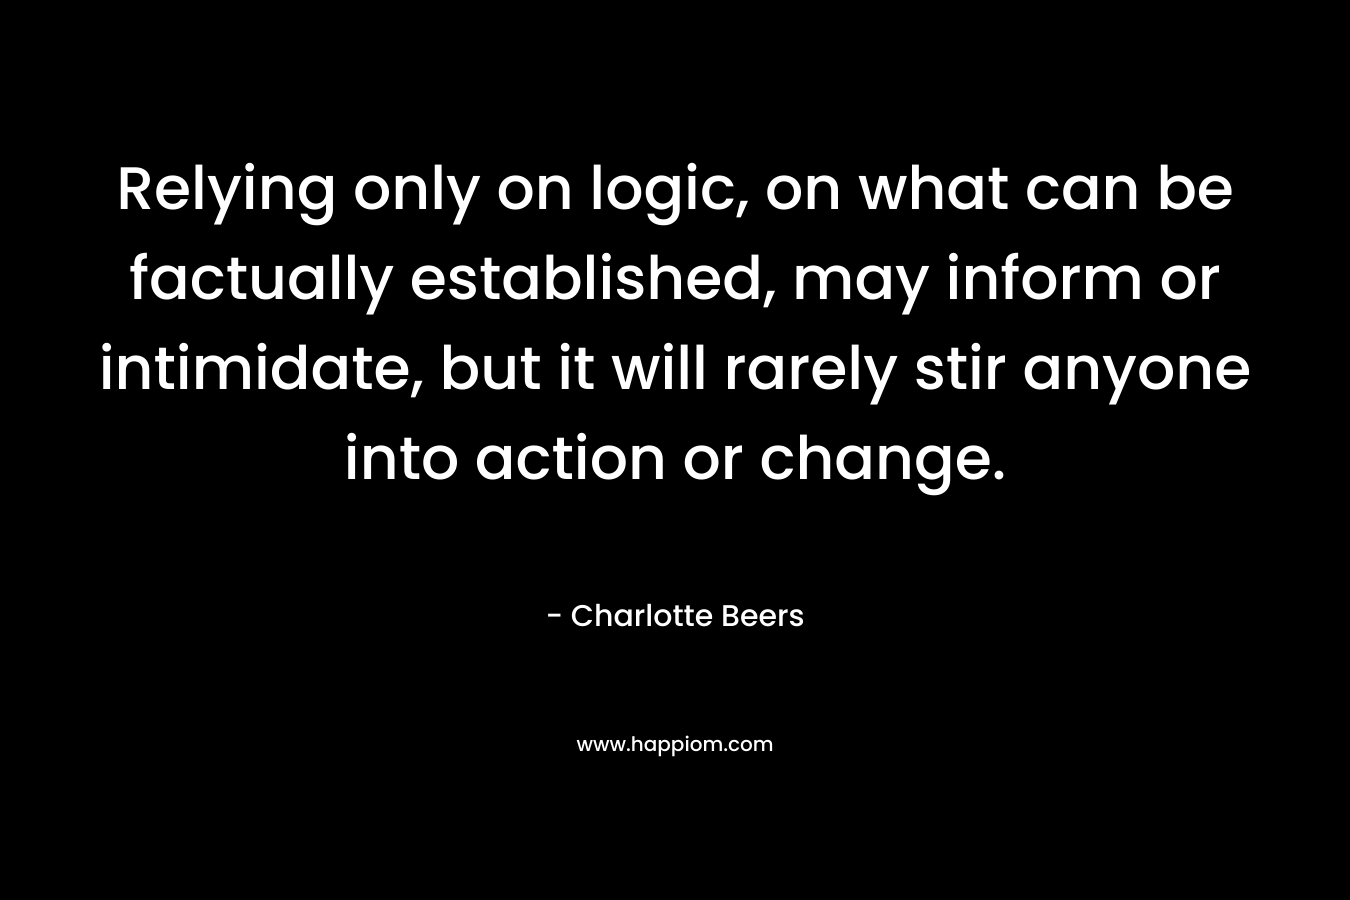 Relying only on logic, on what can be factually established, may inform or intimidate, but it will rarely stir anyone into action or change. – Charlotte Beers